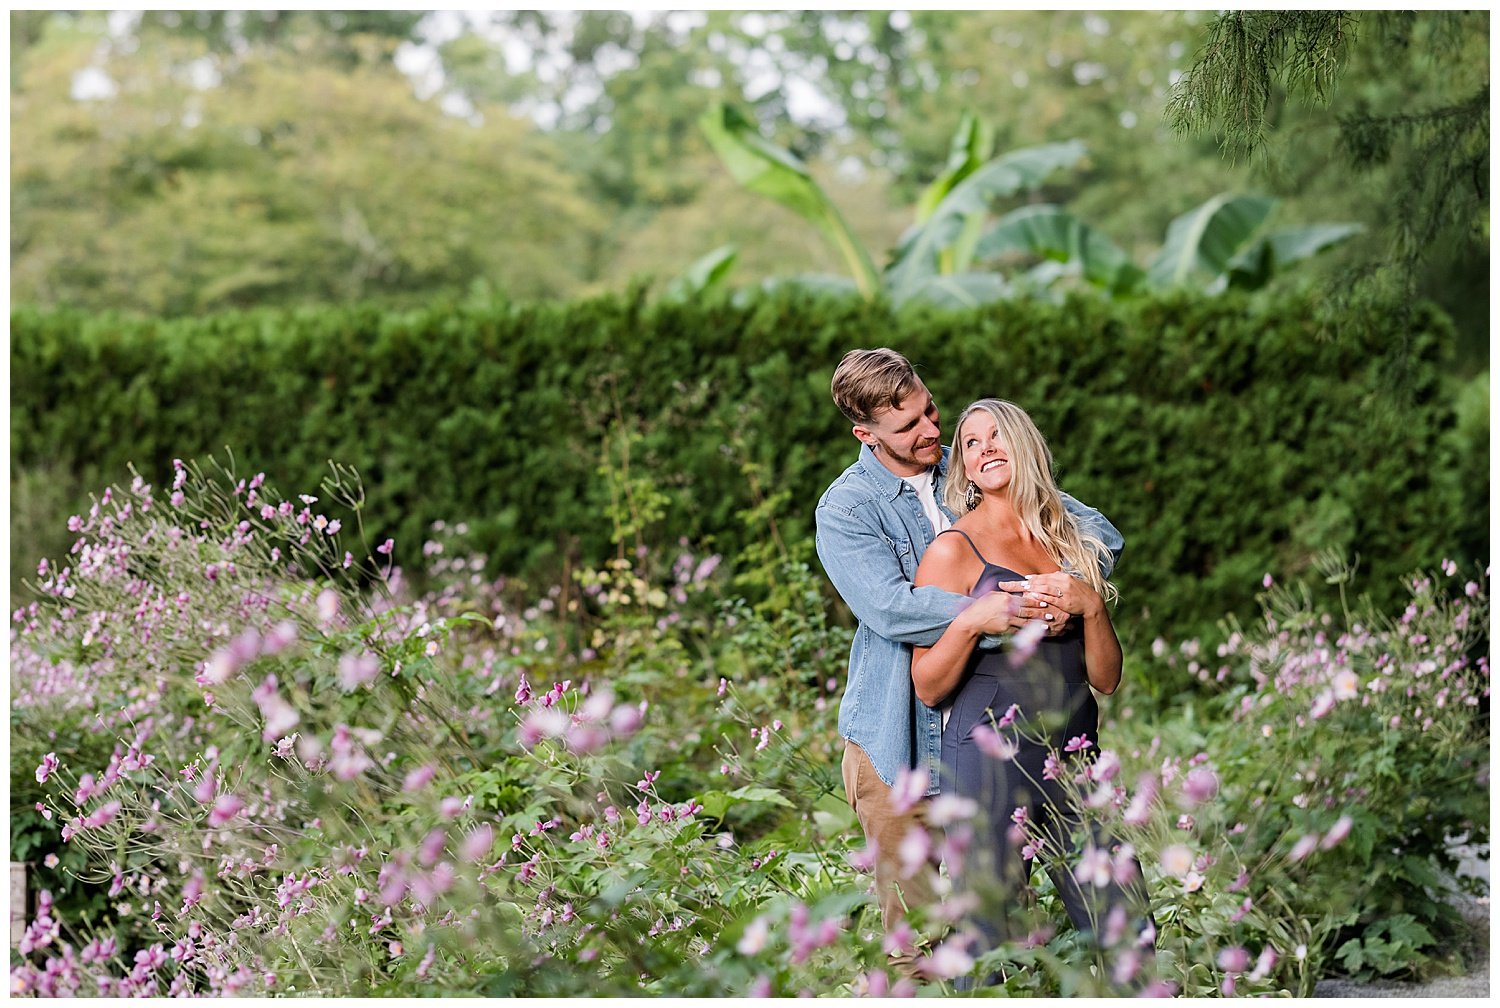 Kennett-Square-PA-engagement-session-with-a-puppy-Longwood-Gardens8.jpg